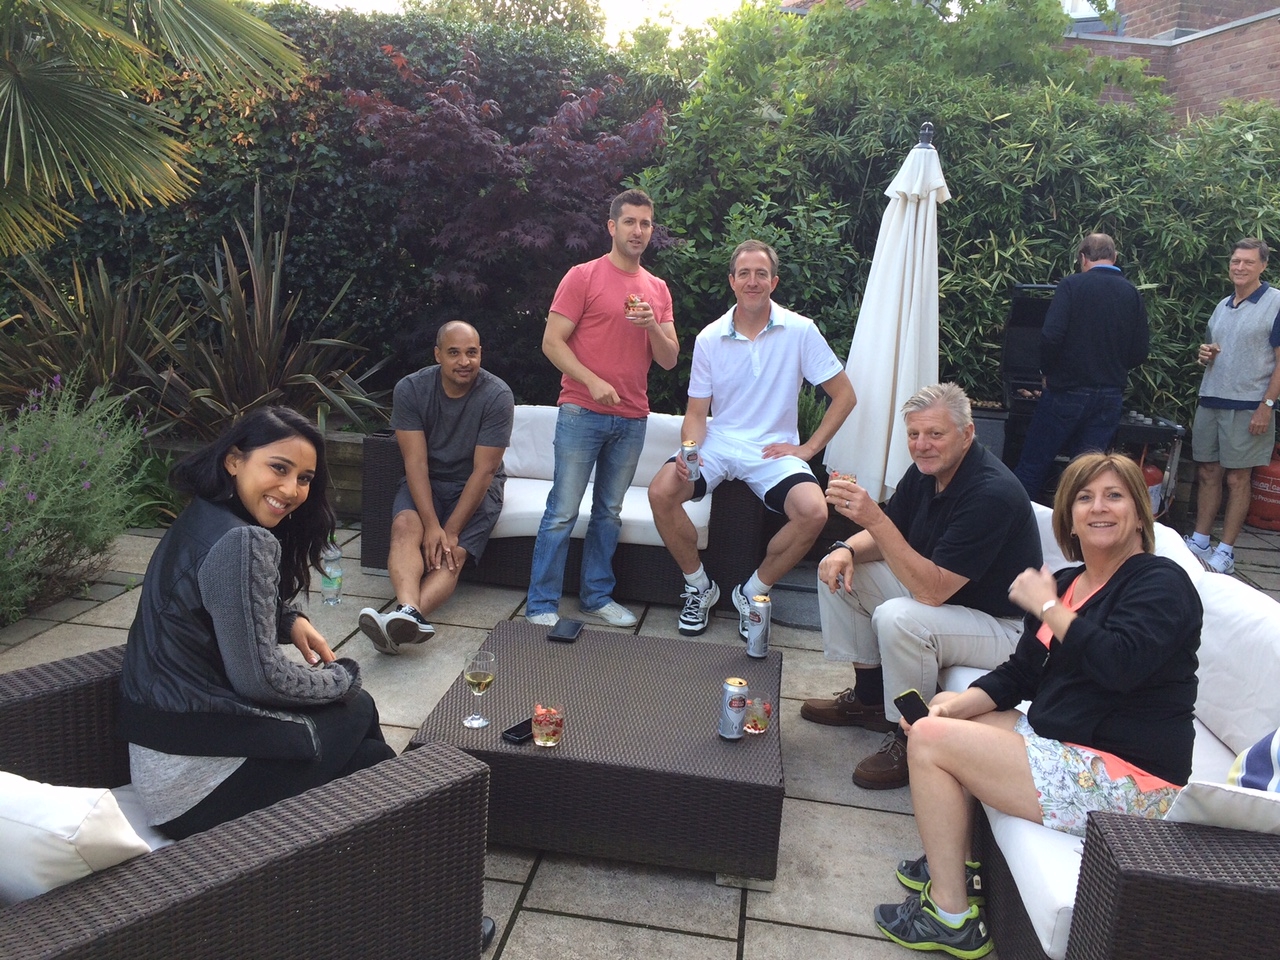 Enjoying a barbeque party on Wimbledon’s traditional “Middle Sunday” day of rest are members of the ESPN digital team (l to r):  Prim Sirpipat, Kurt Streeter, Matt Wilansky, Greg Spivey, Peter Bodo and Missy Isaacson. (Photo courtesy A.G.Garber III)